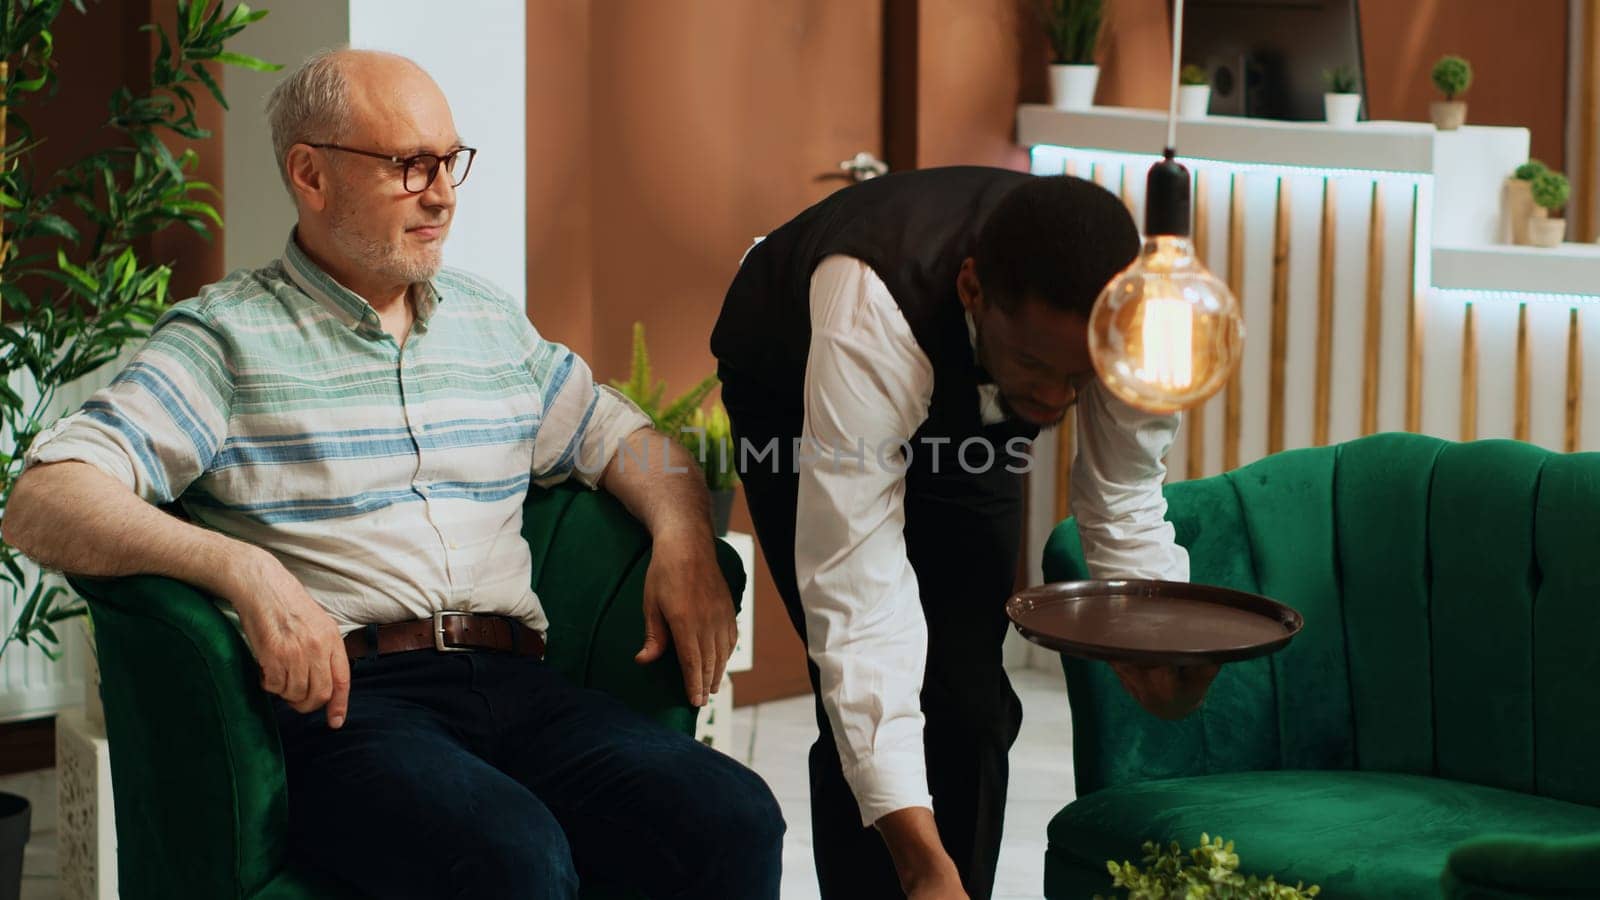 Senior man drinking cup of coffee in lounge area and waiting for room reservation, african american bellhop serving hotel guest with refreshment from bar. Elderly person receiving good staff service.